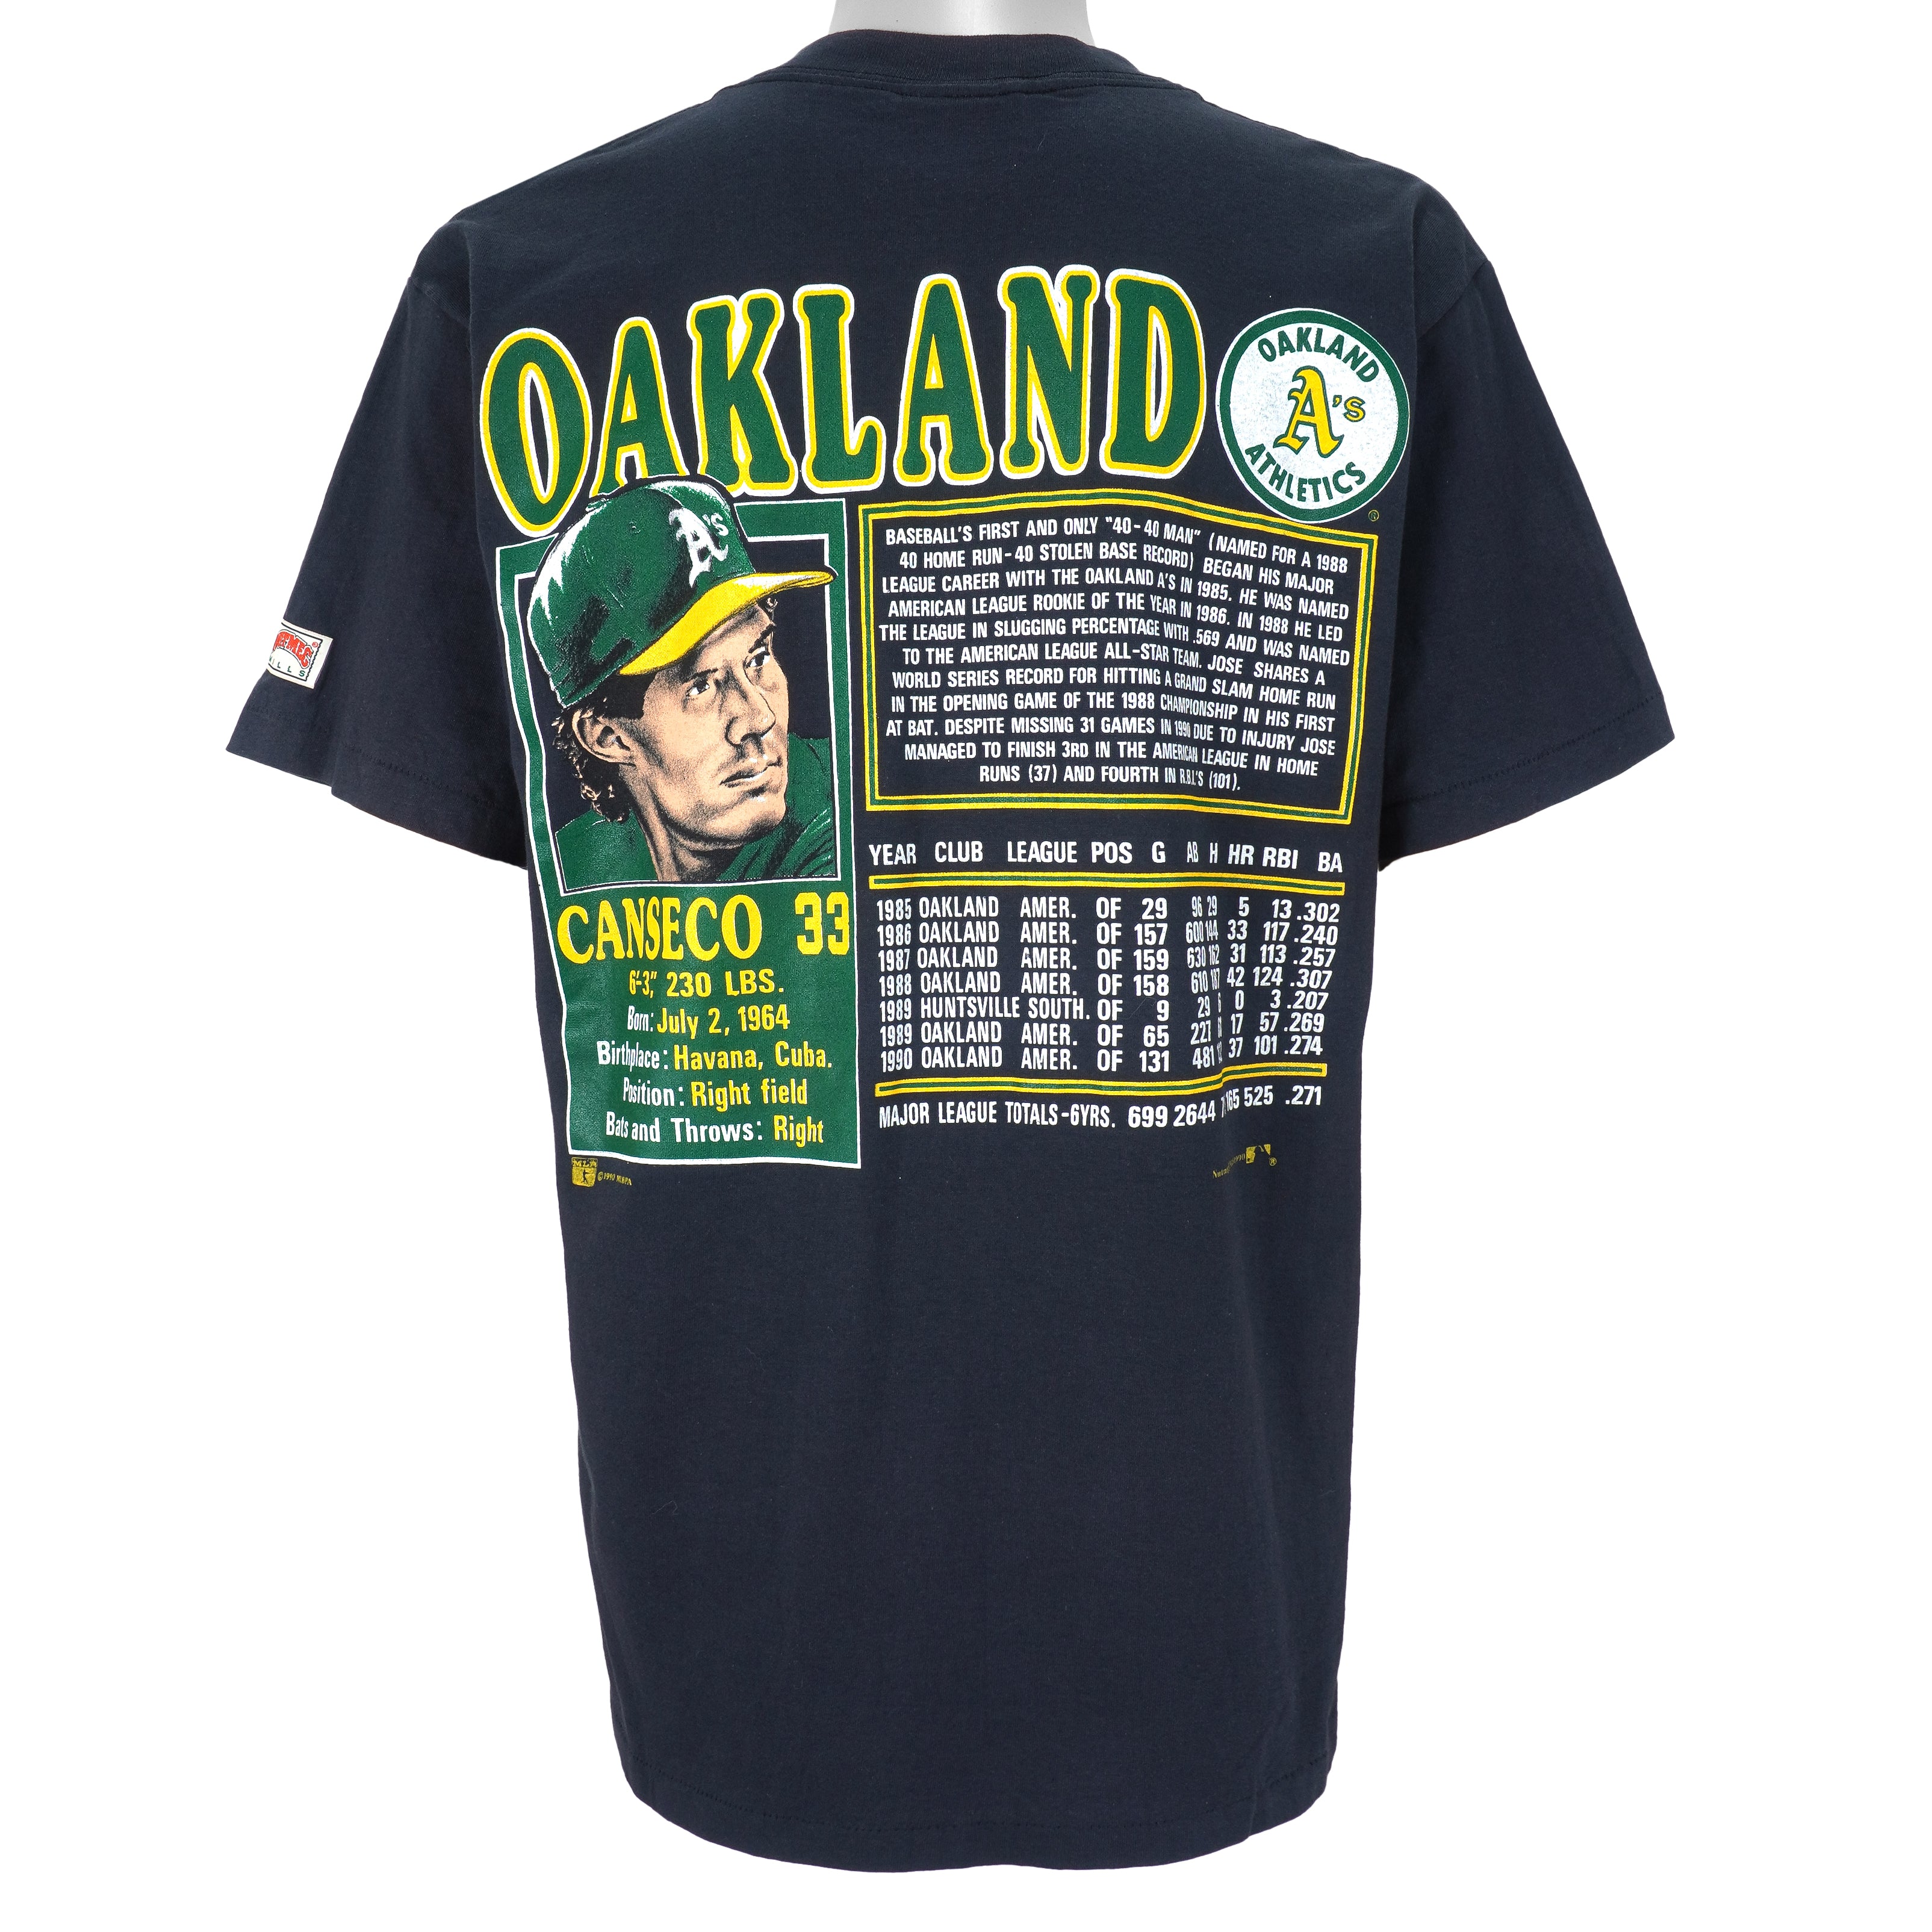 Vintage Oakland A's Hammer Time T-shirt 1990 MLB Baseball Canseco